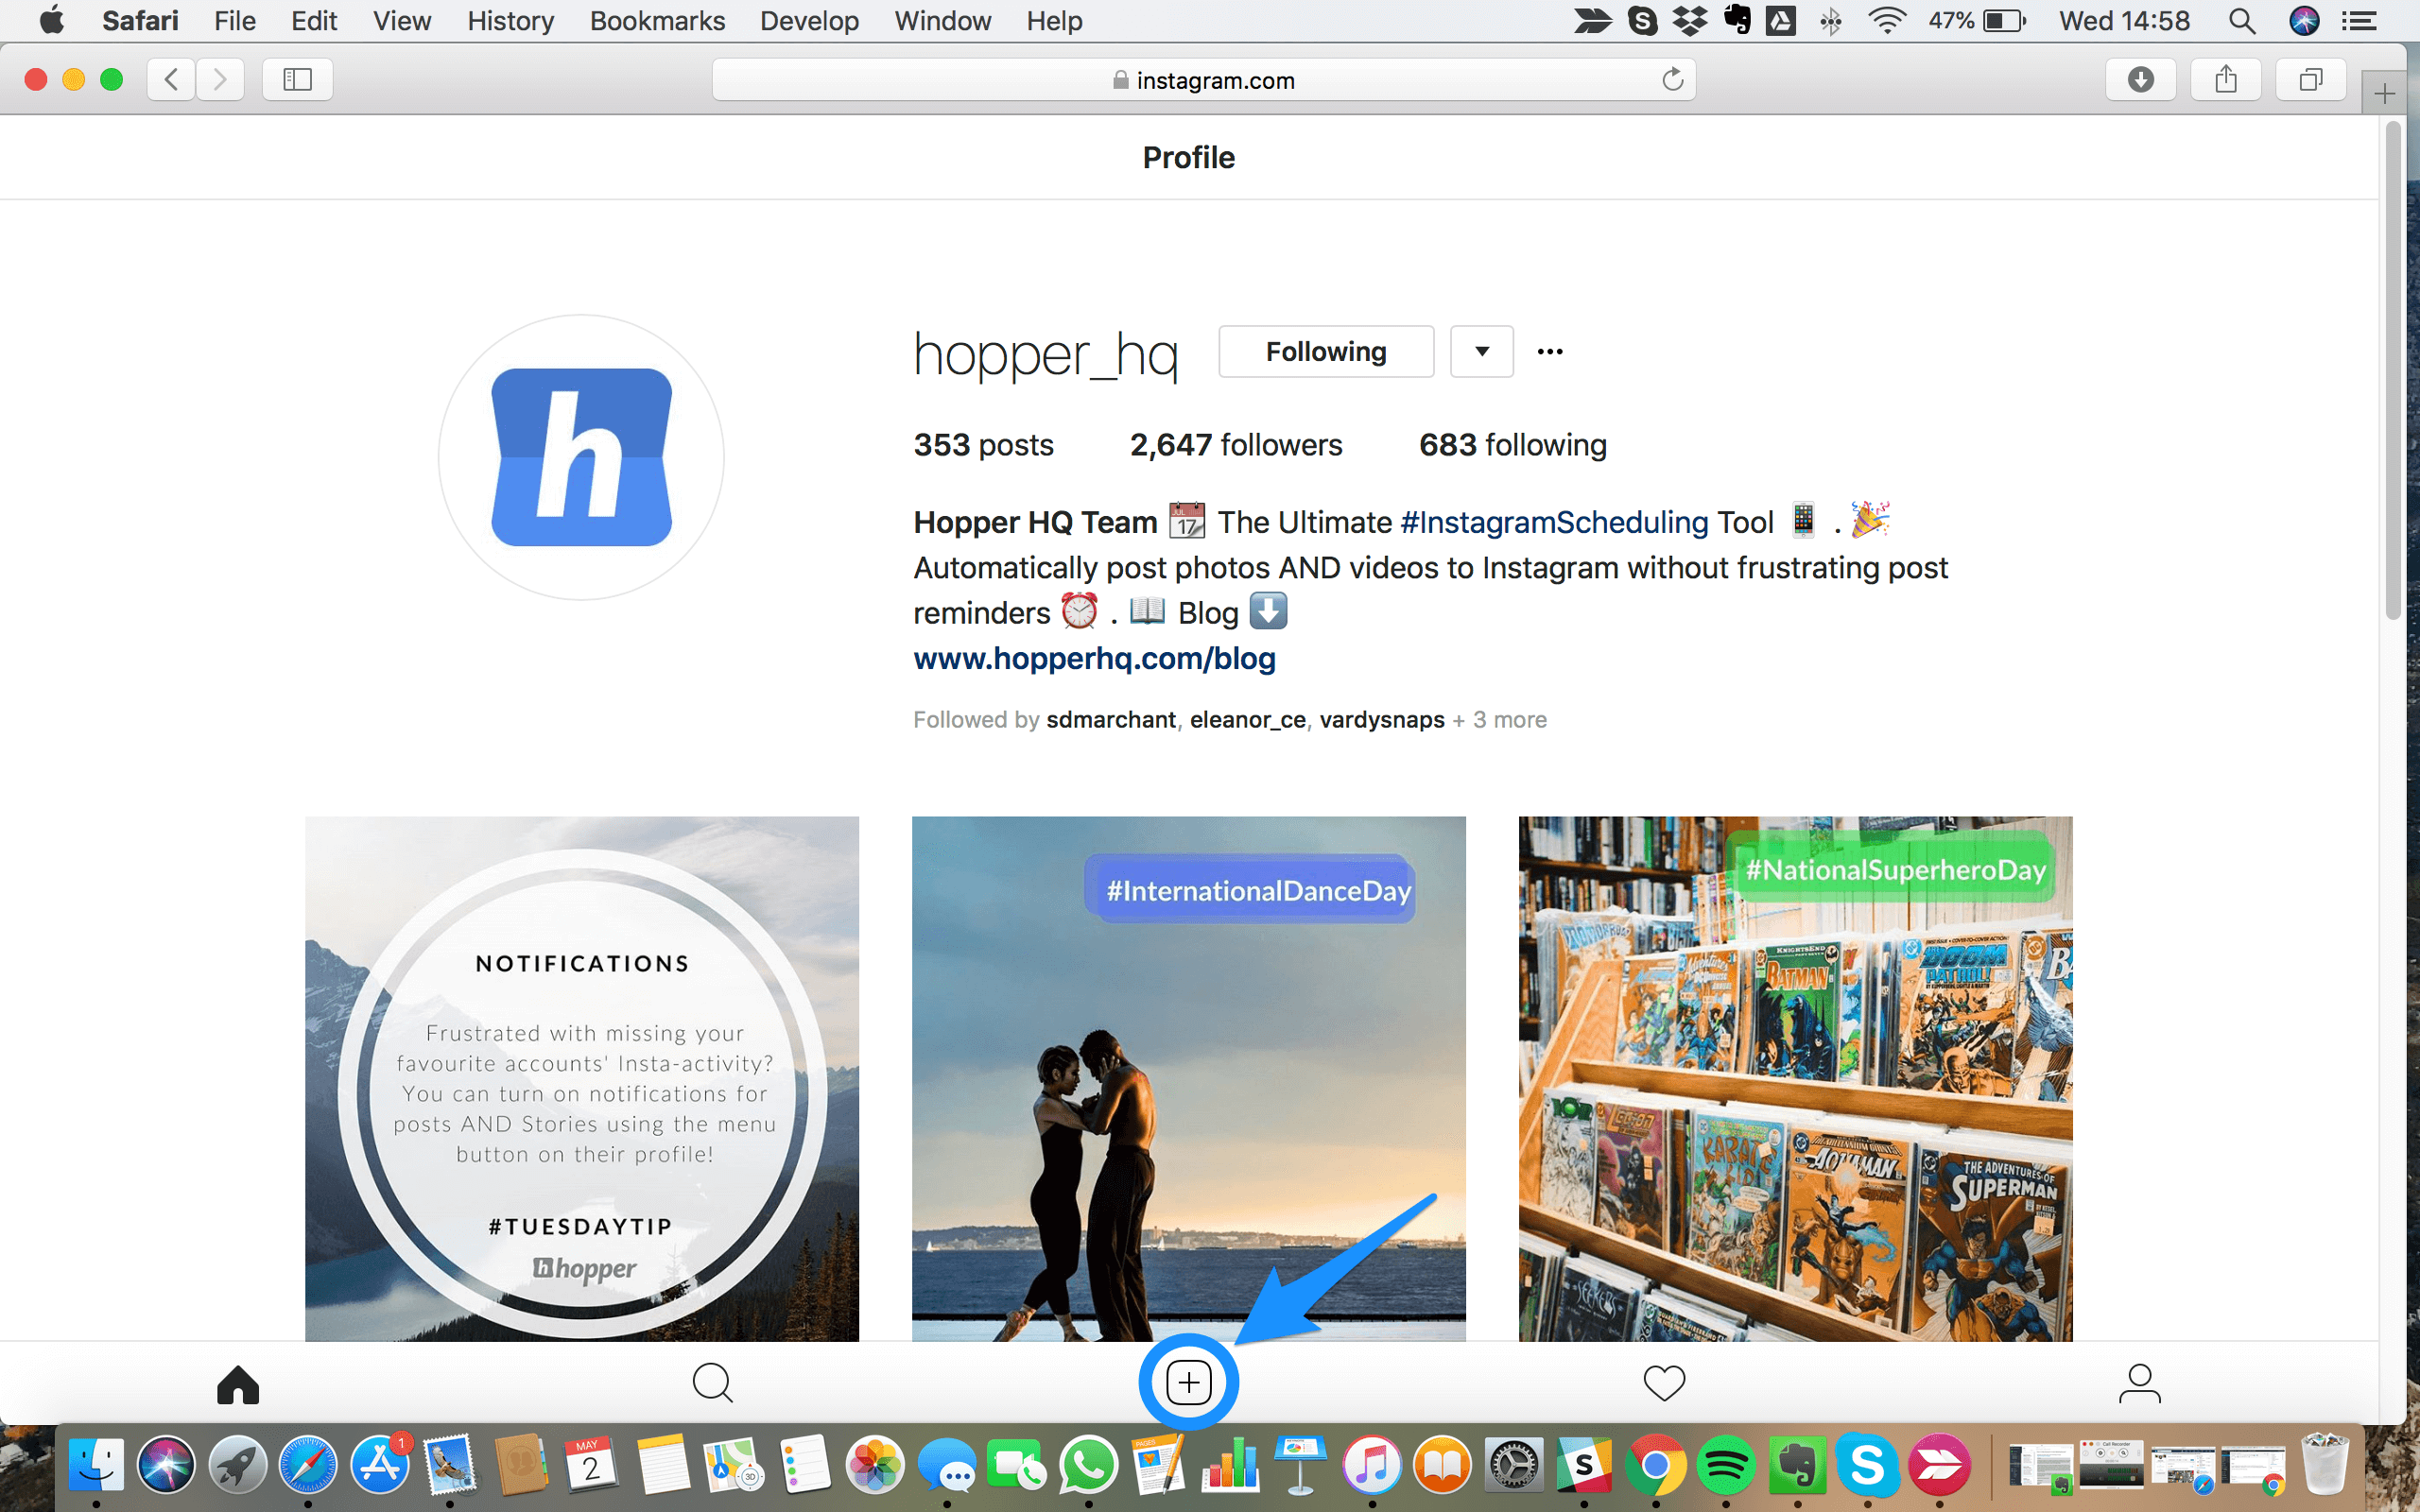 Finding the share button on Instgram.com